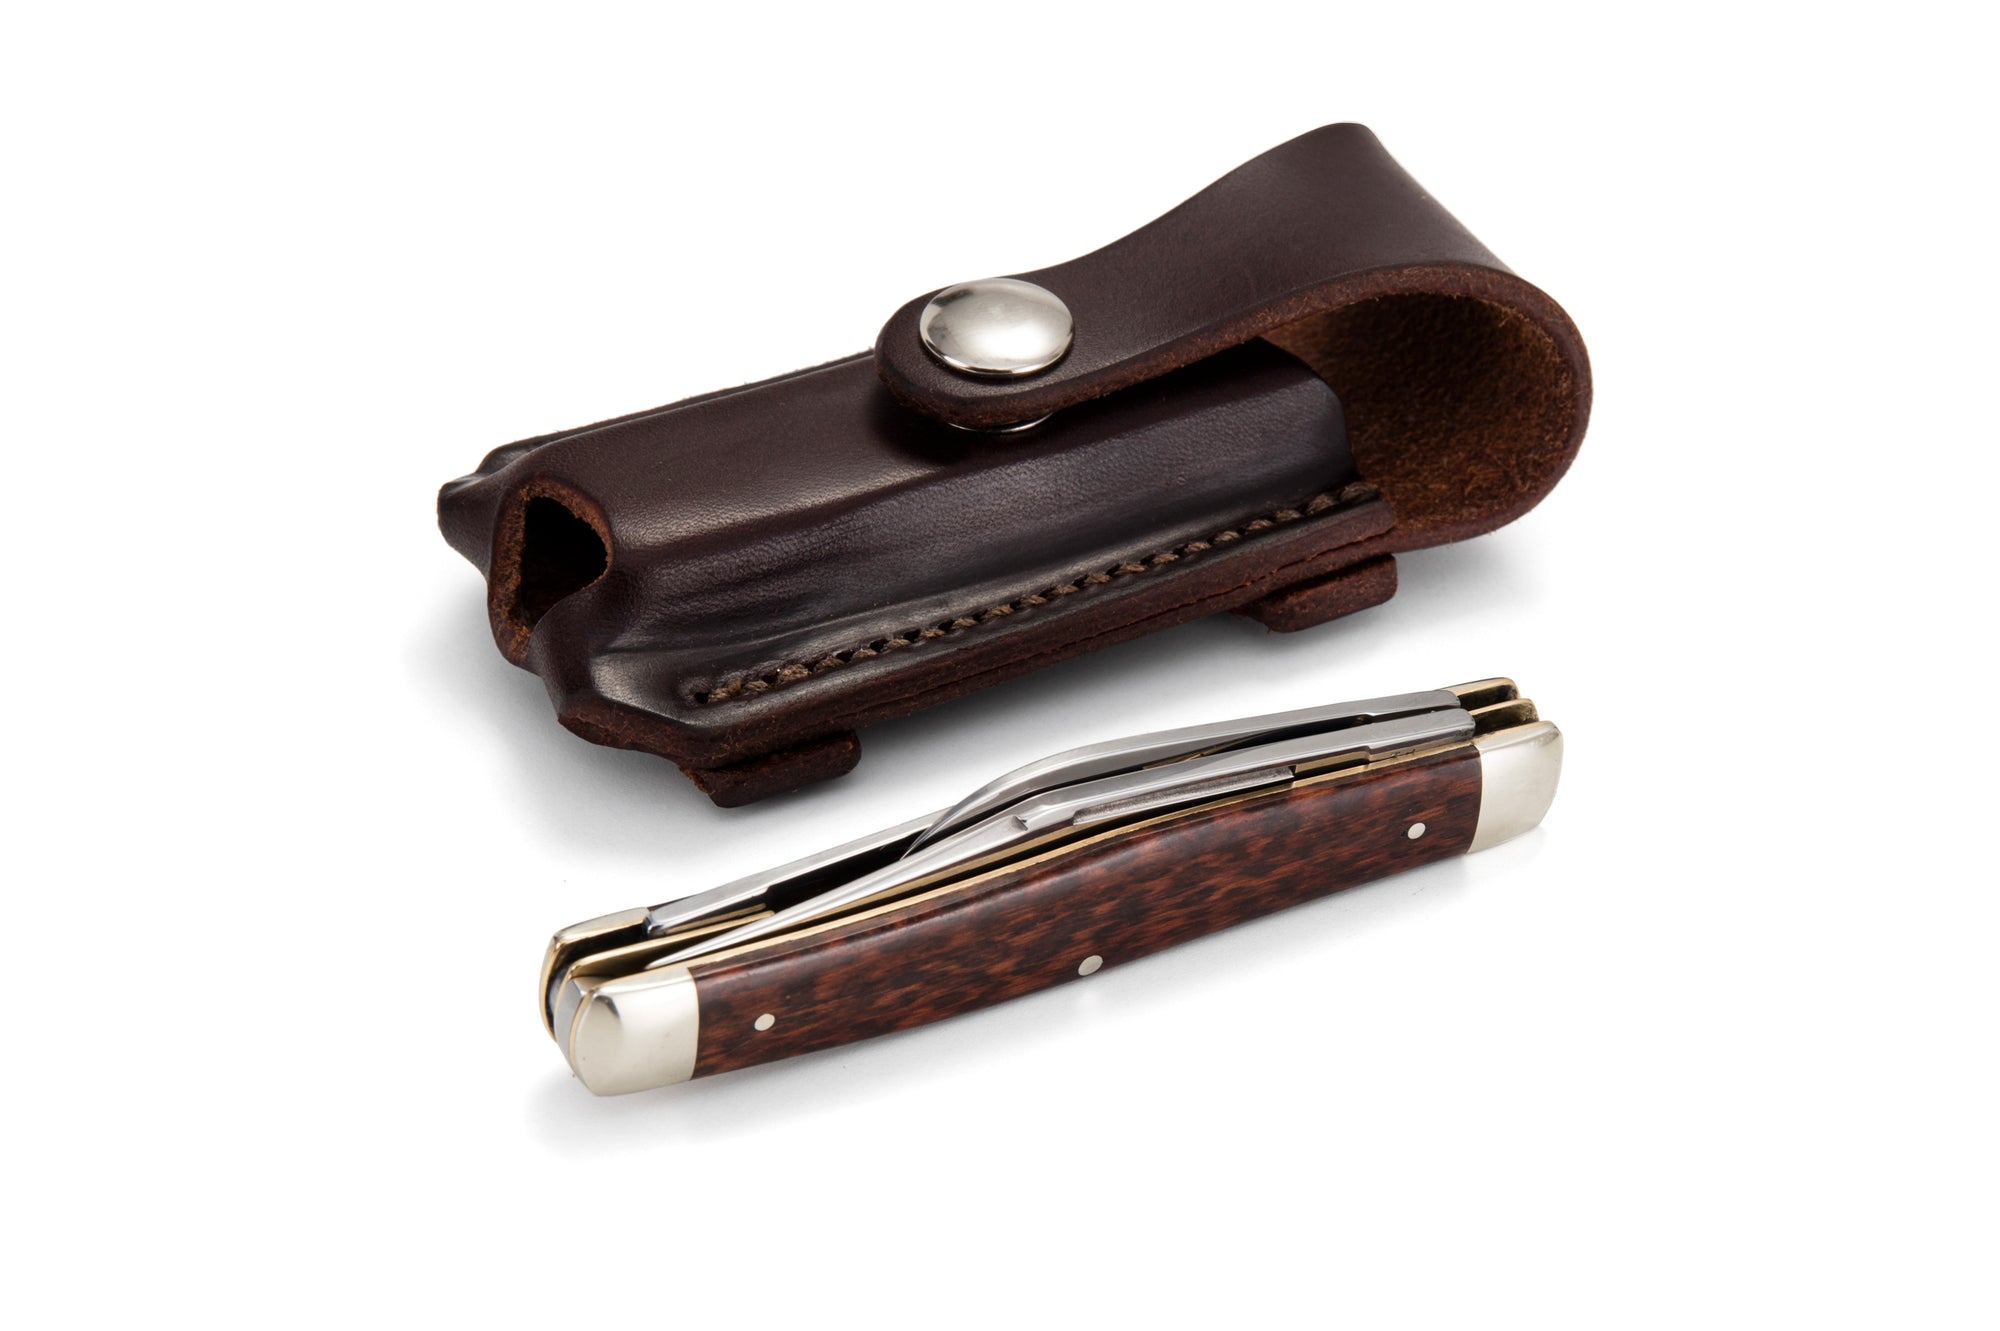 Angus Barrett Button Close Knife Pouch in Dark Natural with Robert Klaas Snakewood Knife